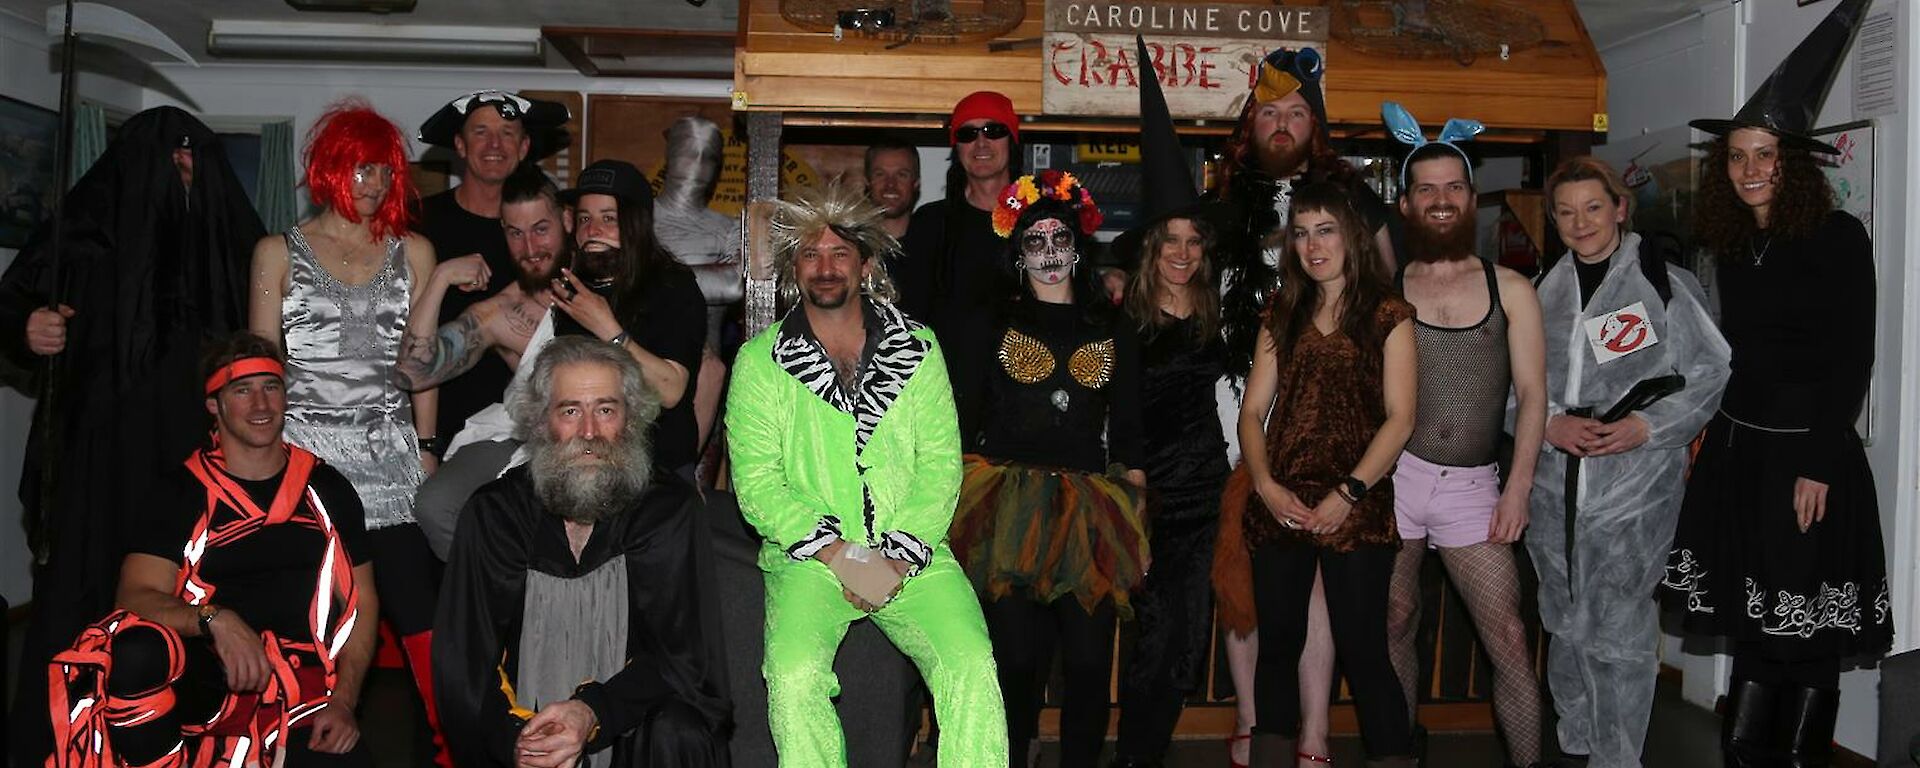 Group photo of expeditioners in costumes for halloween